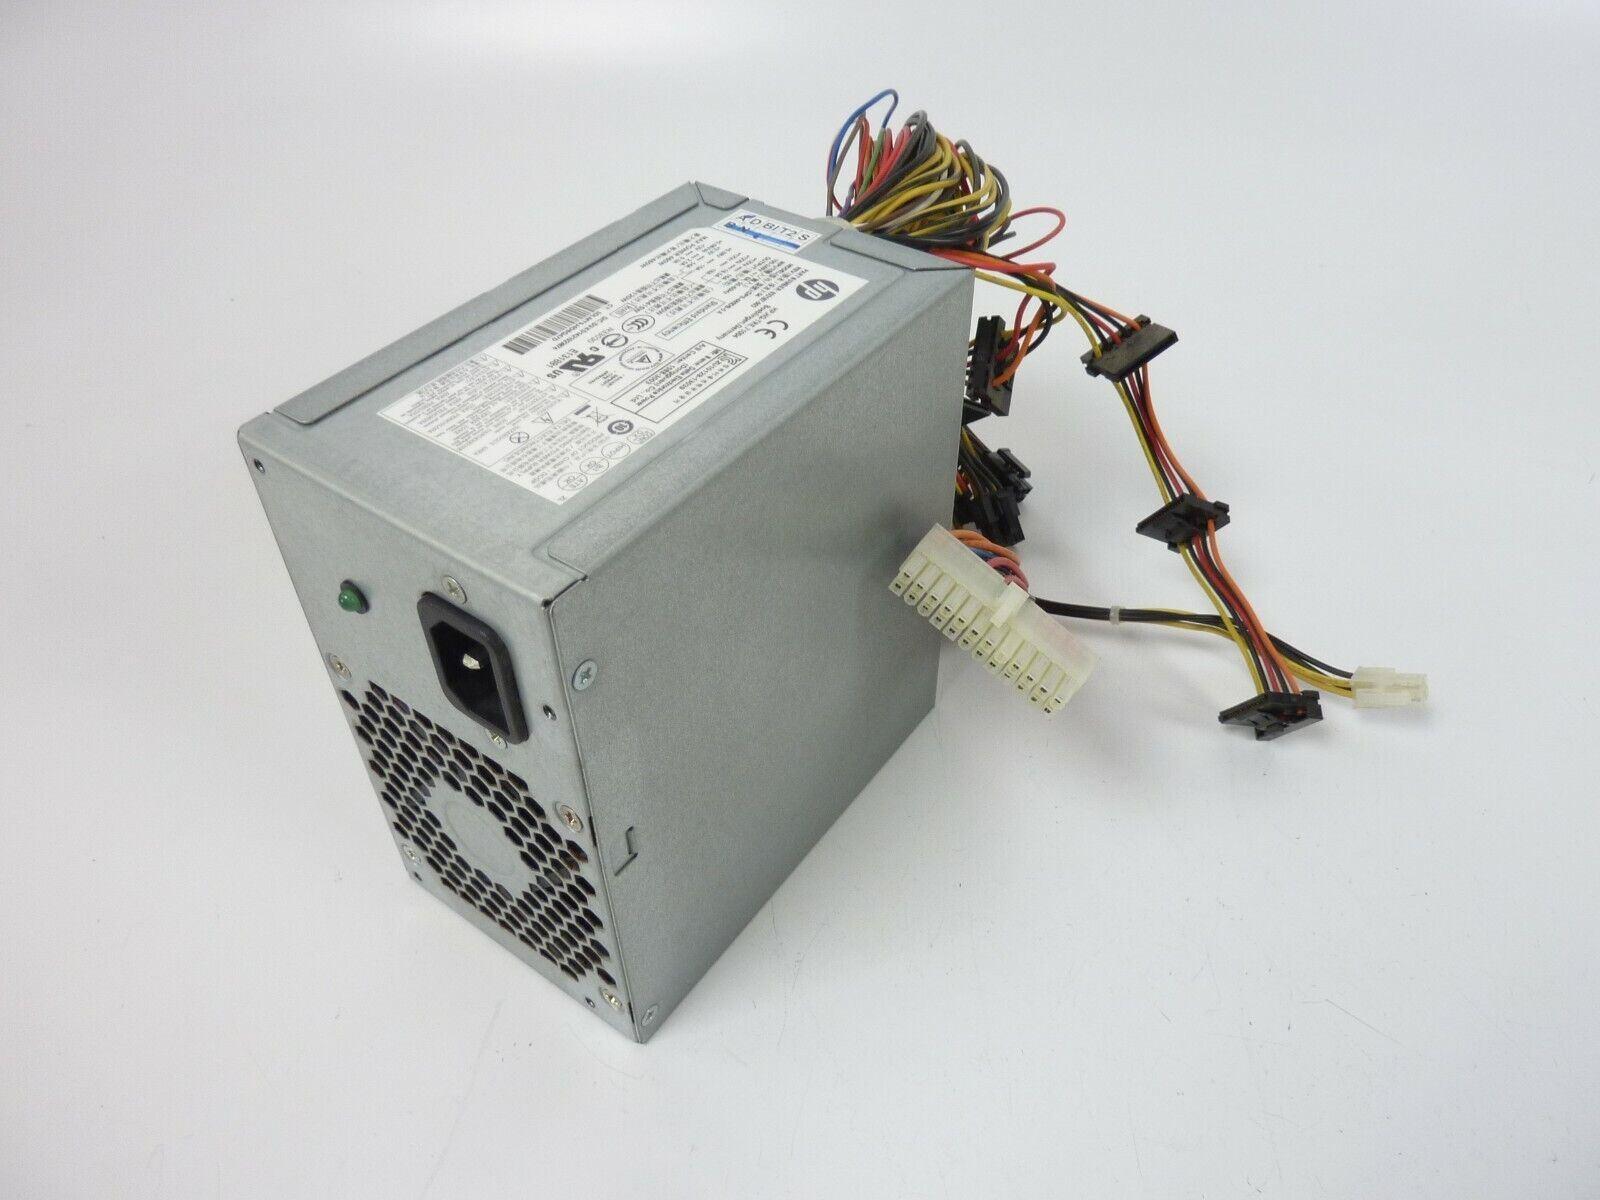 DPS 460DB 5 633187 003 power supply bordeaux c 460w active pfc